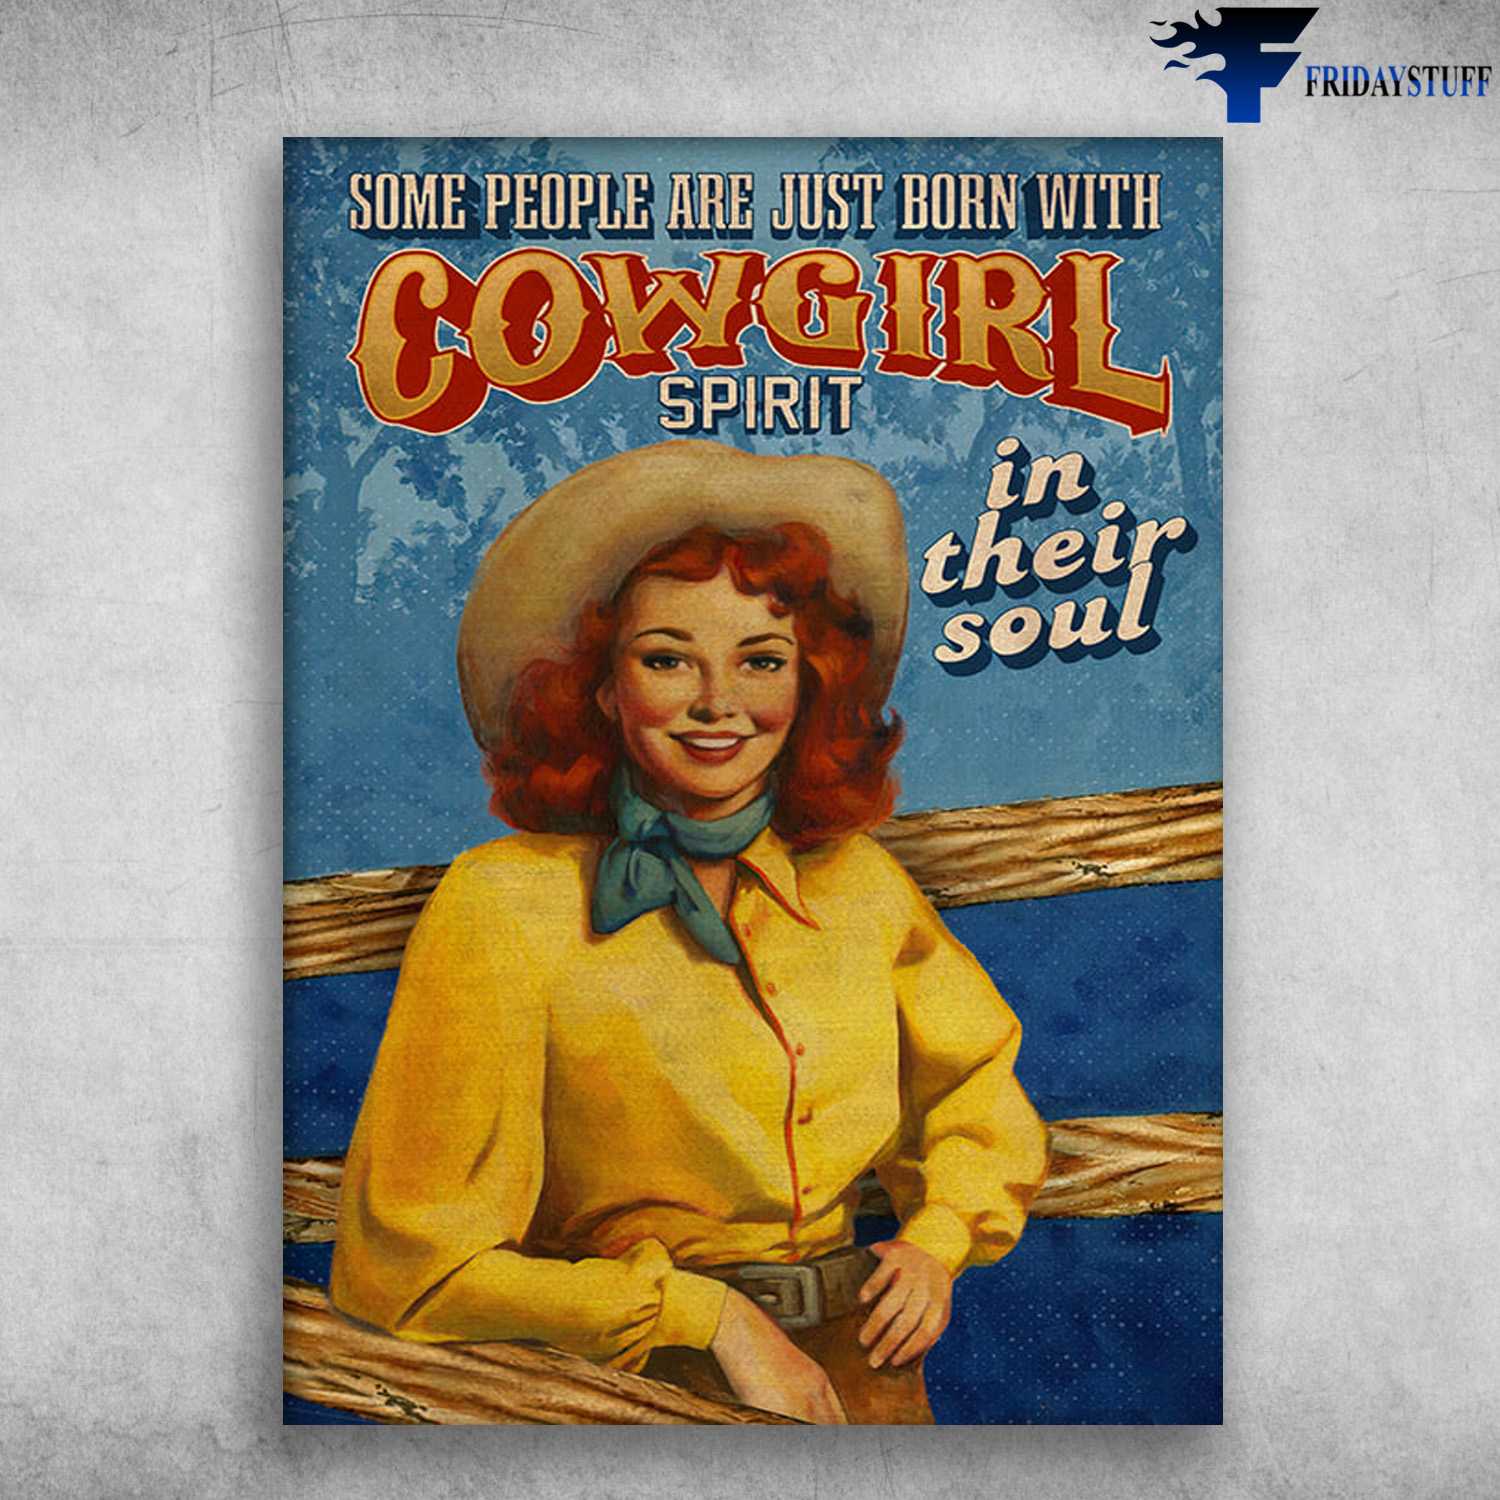 Cowgirl Poster, Cowgirl Spirit, Some People Are Just Born With Cowgirl Spirit, In Their Soul